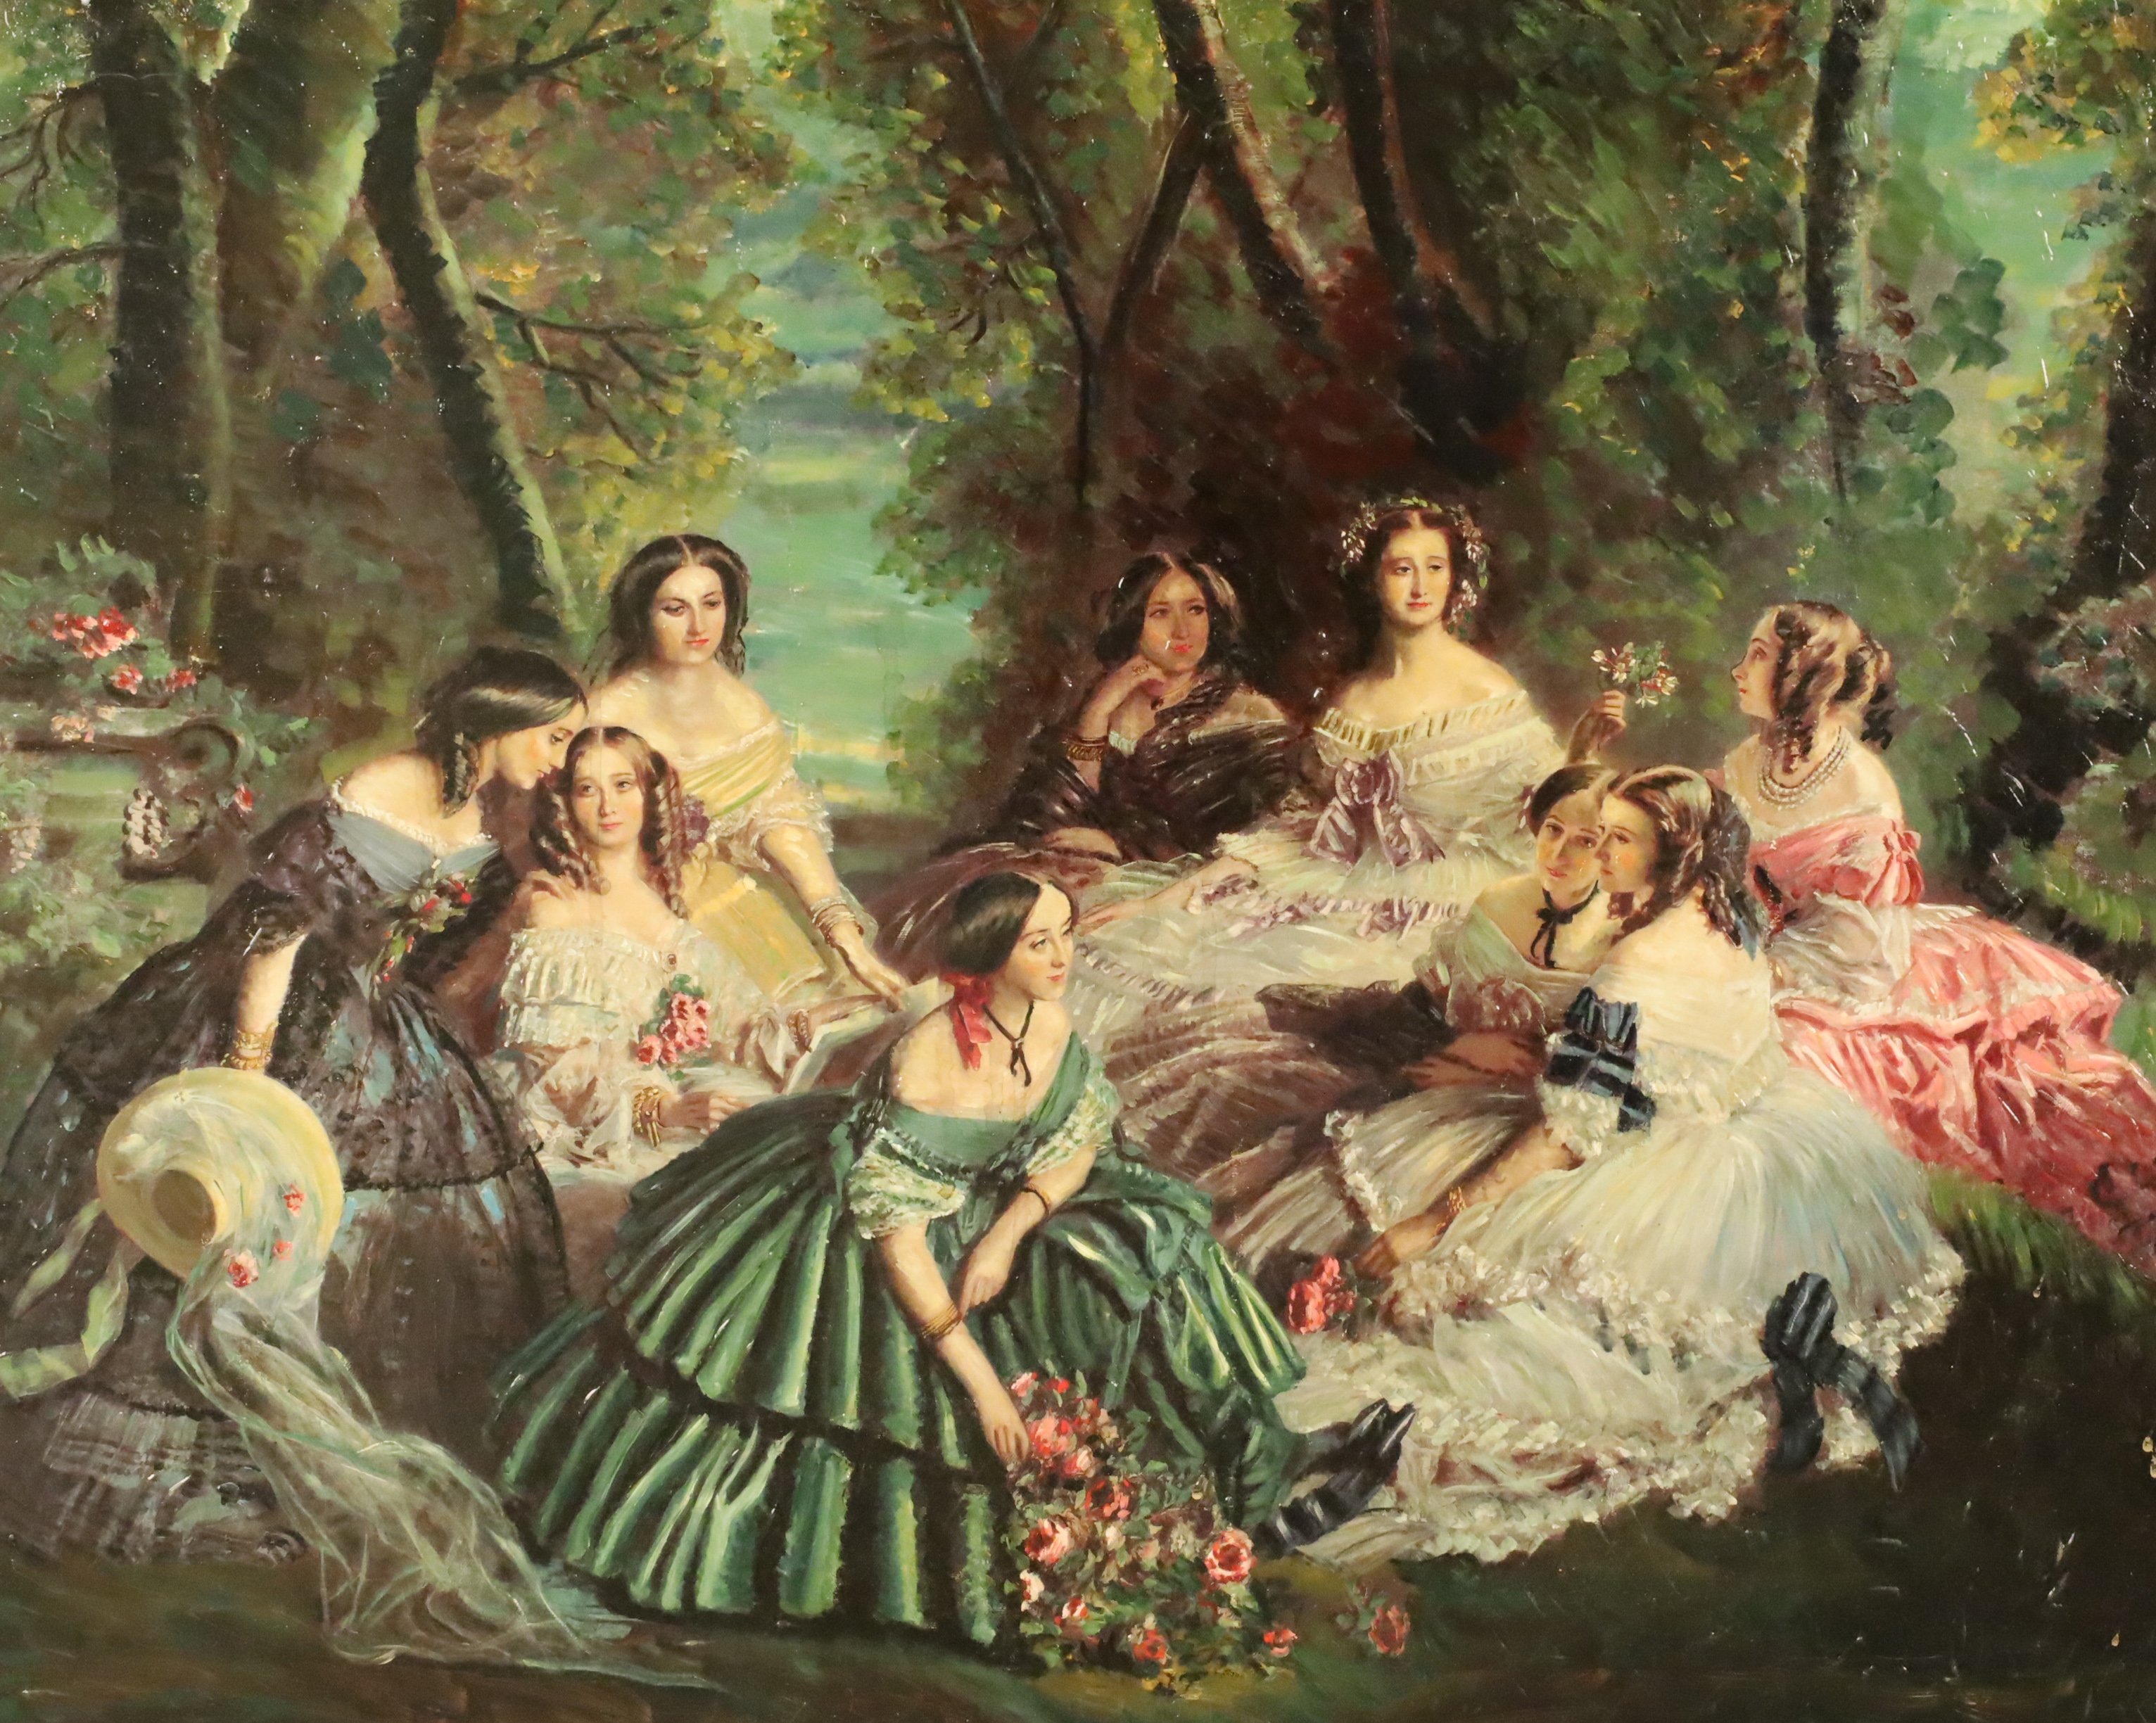 Portrait of the Empress Eugenie Surrounded by Her Ladies in